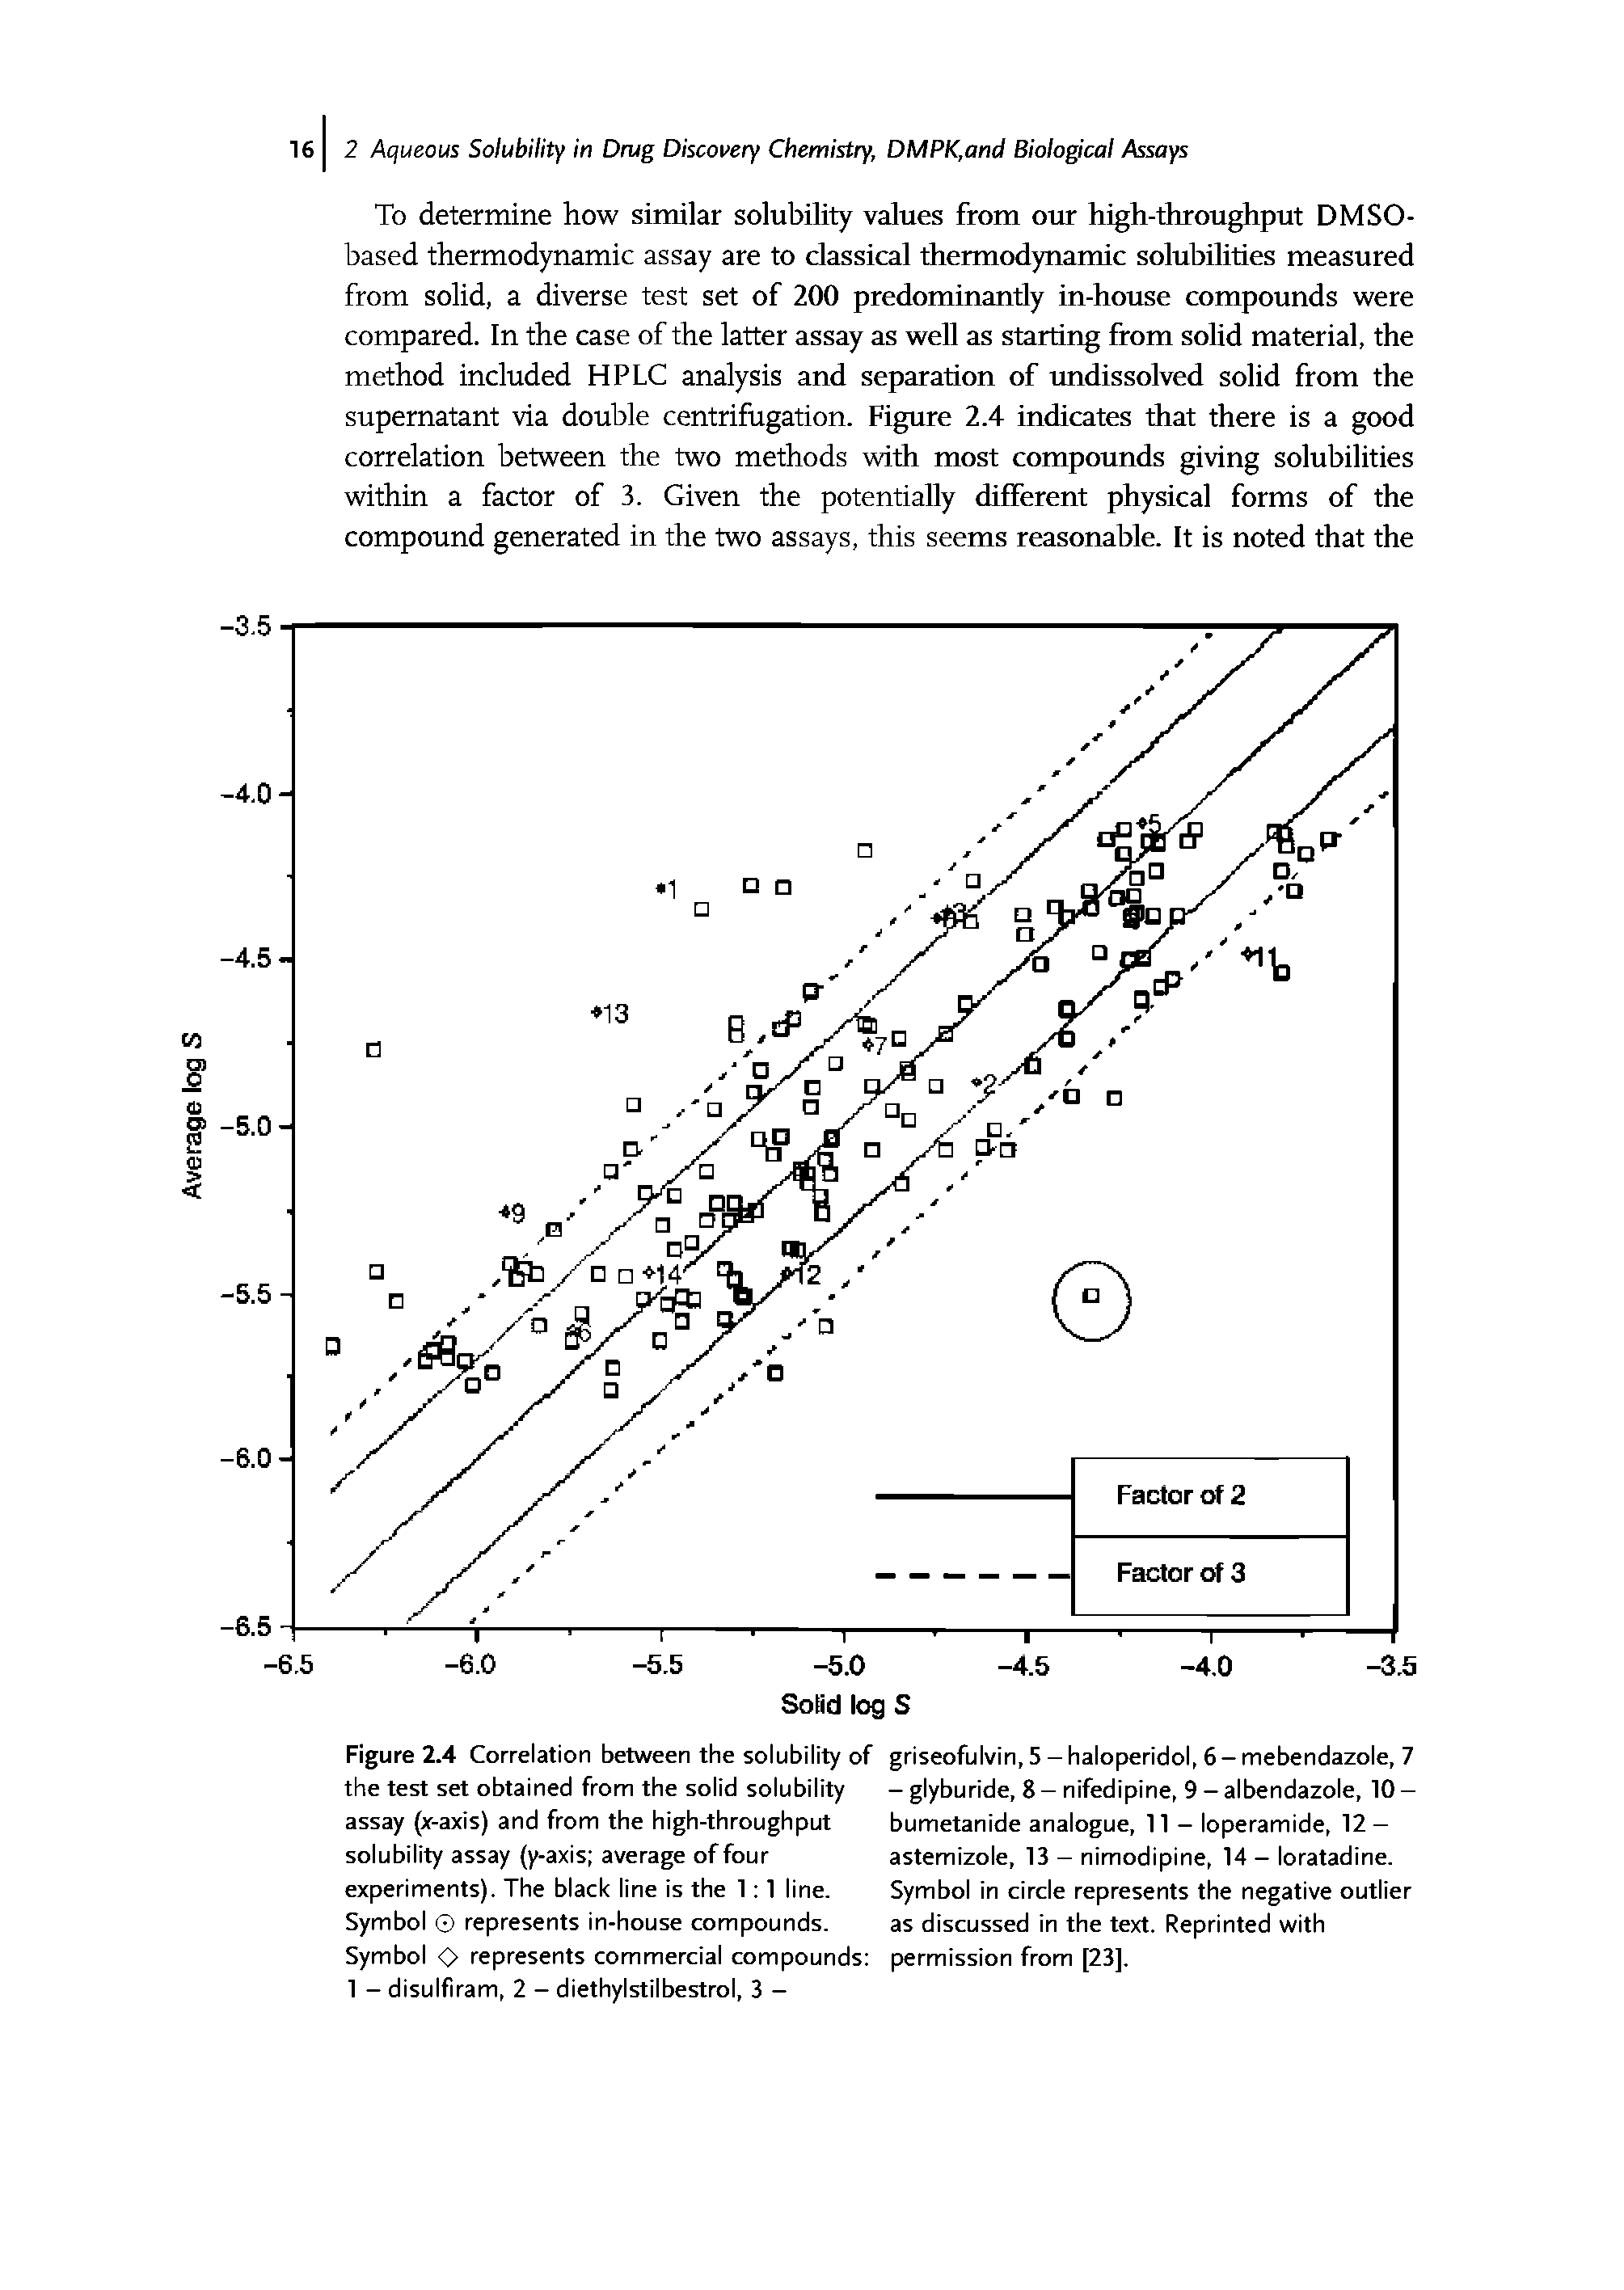 Figure 2.4 Correlation between the solubility of the test set obtained from the solid solubility assay (x-axis) and from the high-throughput solubility assay (y-axis average of four experiments). The black line is the 1 1 line. Symbol represents in-house compounds. Symbol O represents commercial compounds 1 - disulfiram, 2 - diethylstilbestrol, 3 -...